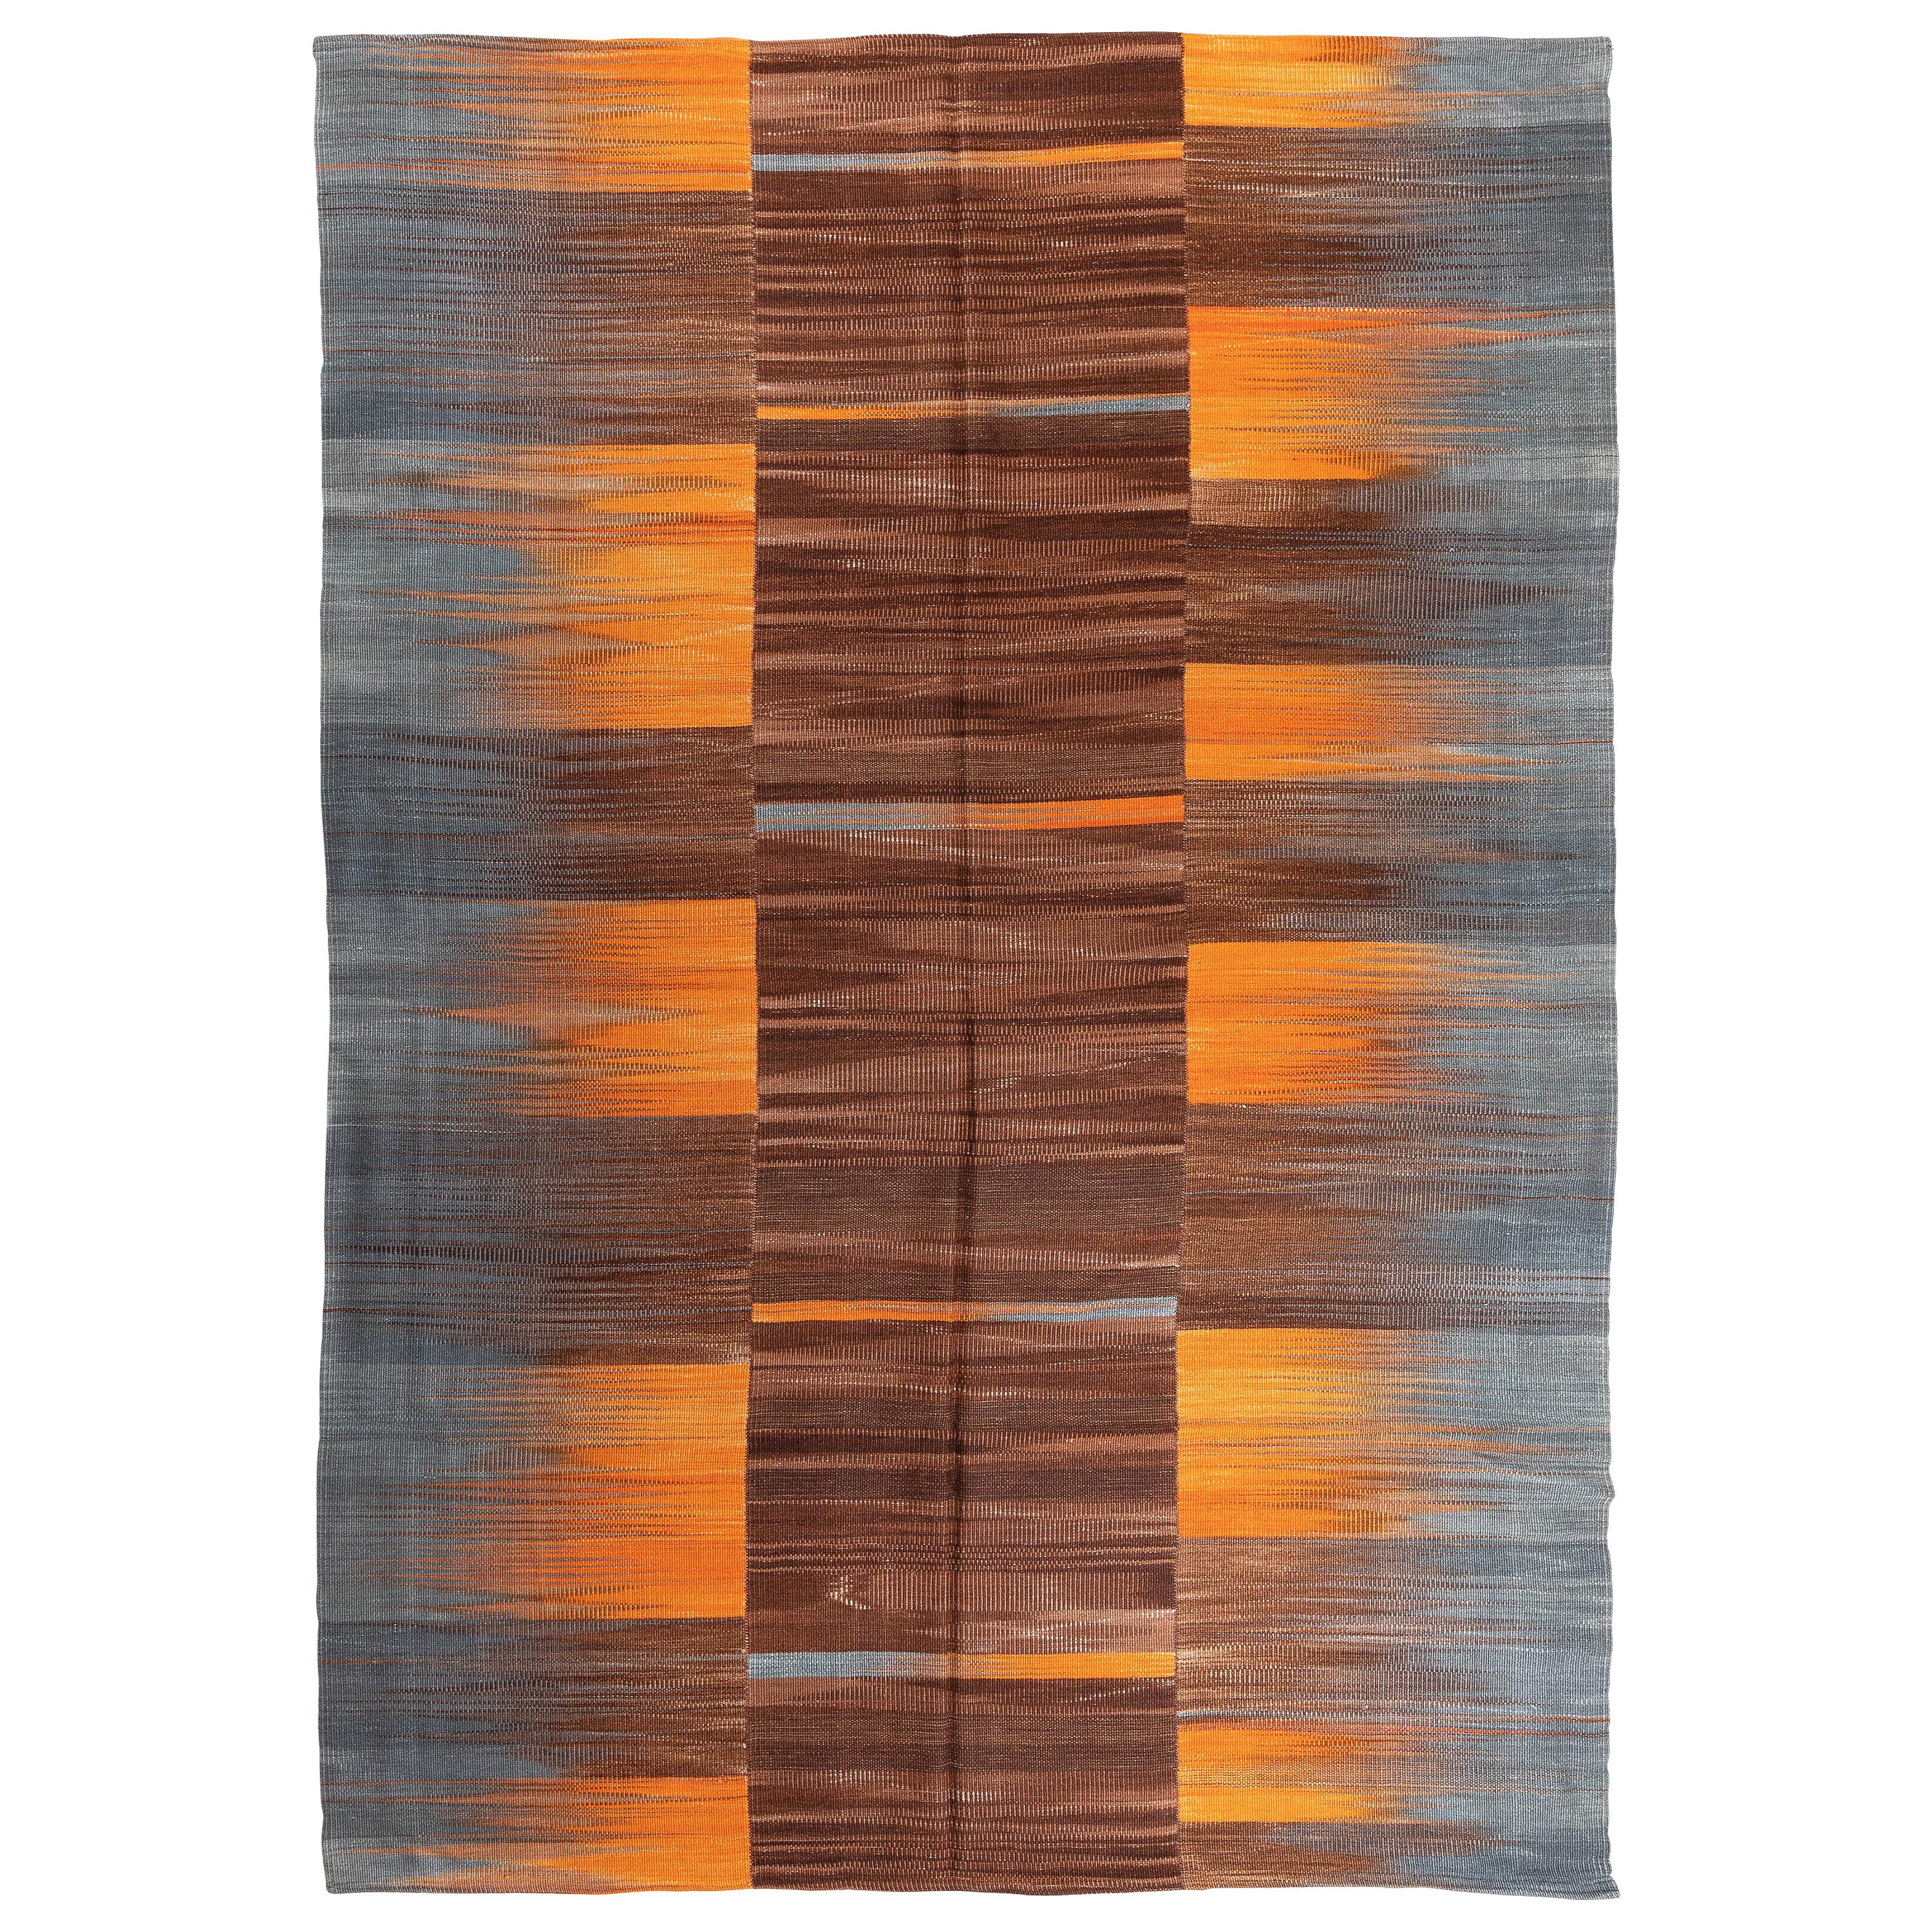 7'8'' x 10'9' New Turkish Kilim, Modern Double Sided Rug in Orange, Gray & Brown For Sale